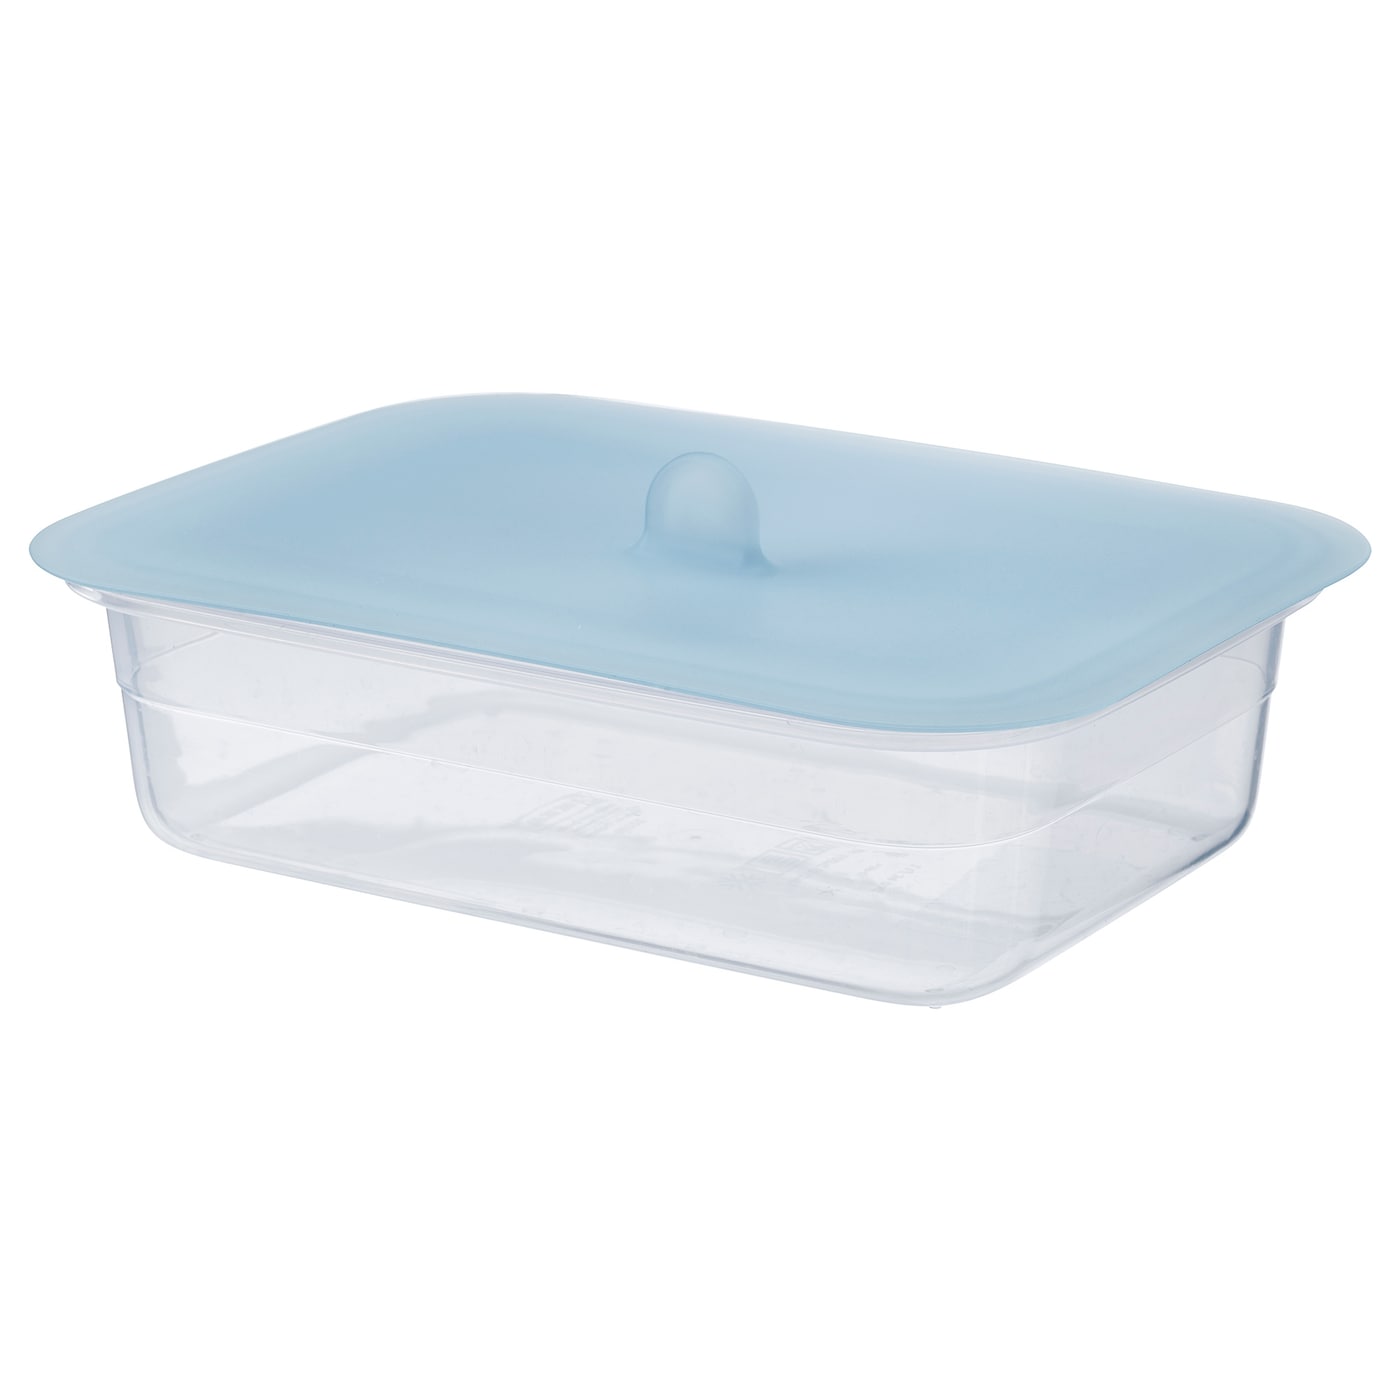 Plastic Containers: Affordable Luxury for Your Home